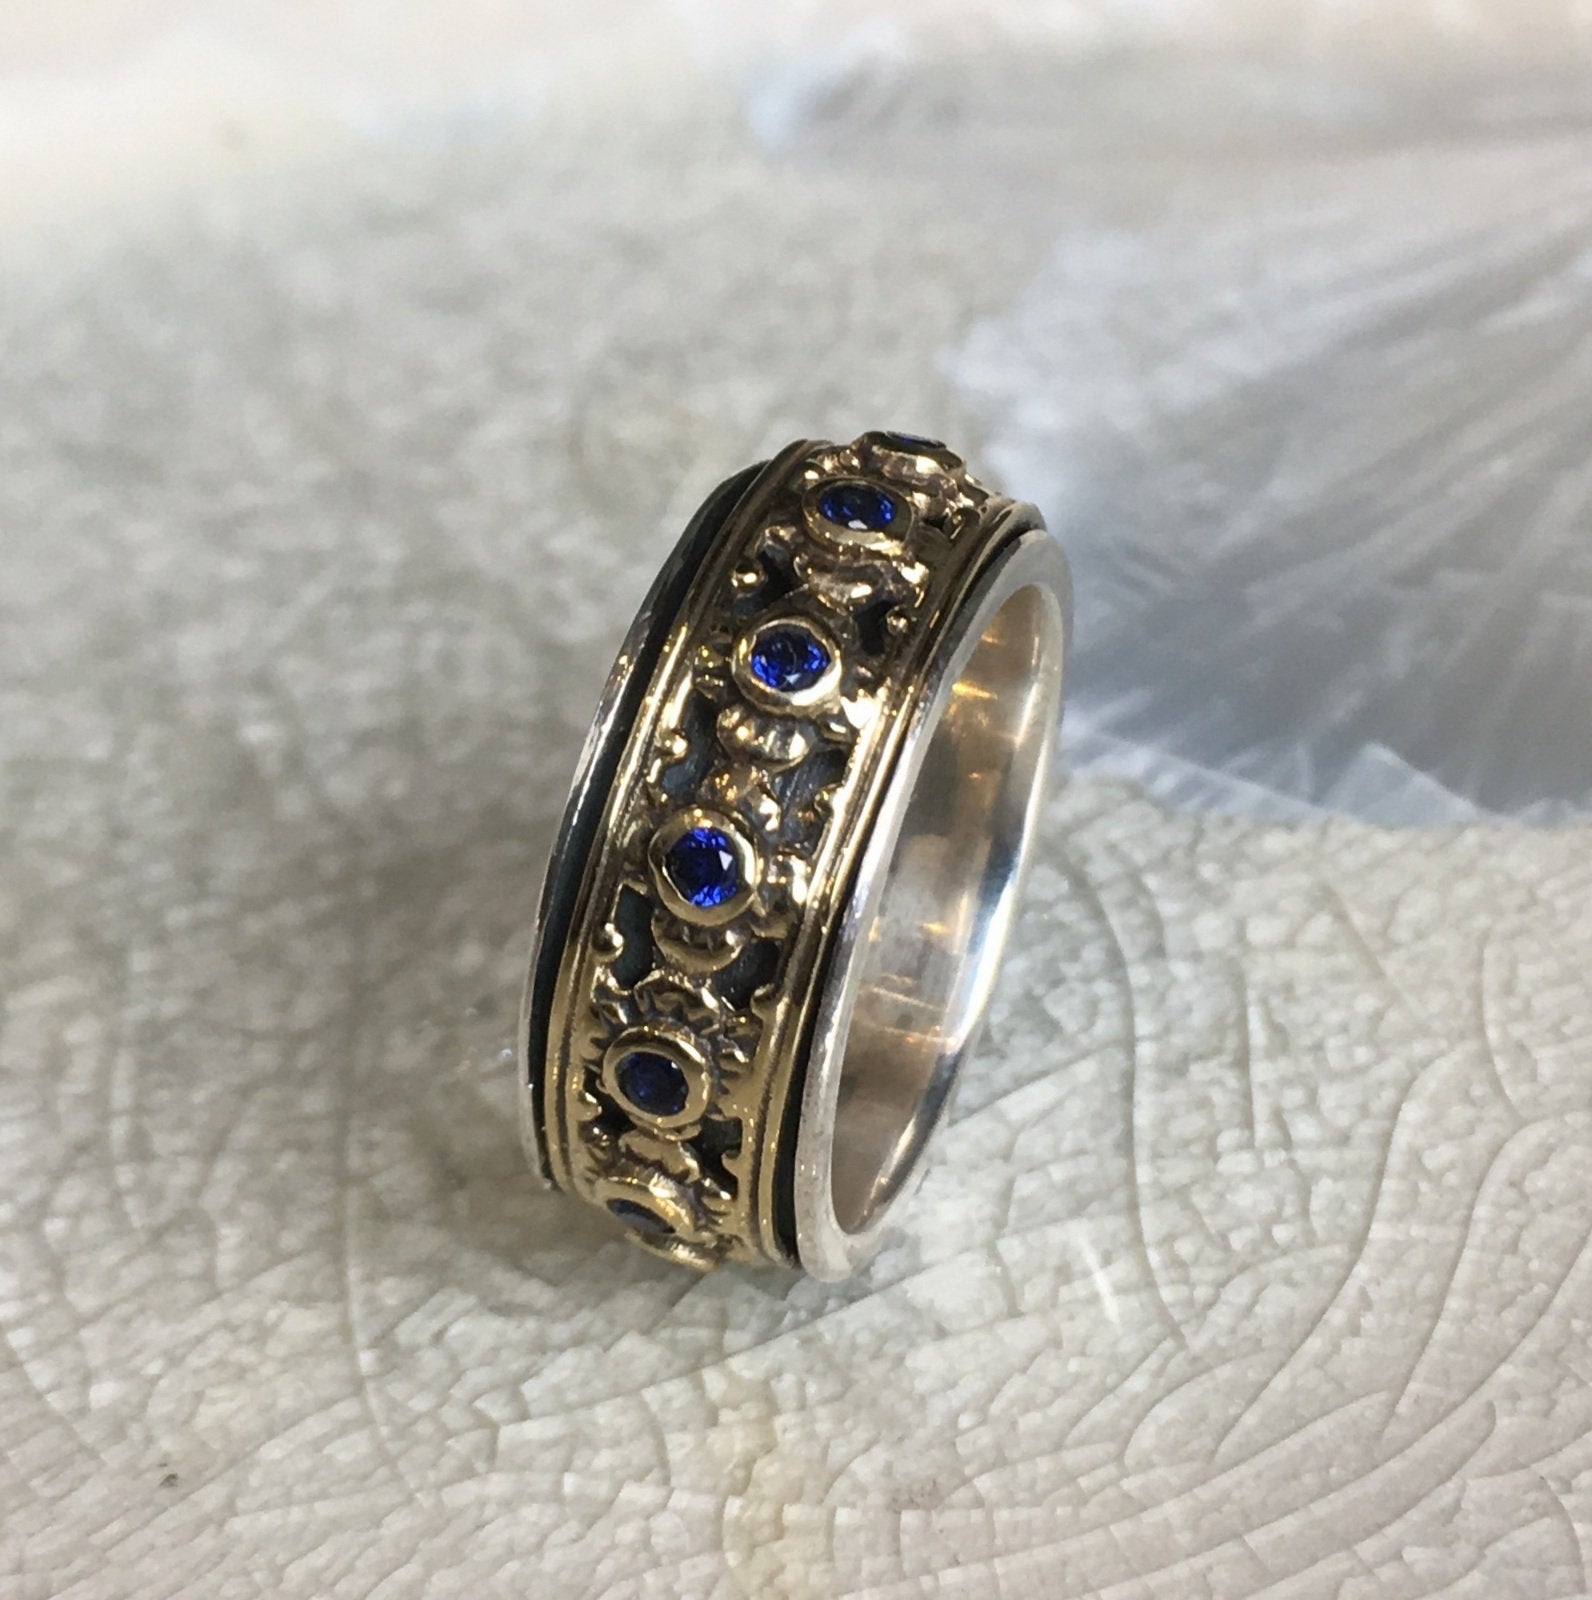 Spinner ring, Sapphires Ring, birthstones ring, meditation ring, two-tone wedding band, sterling silver gold band - New beginnings. R1149X